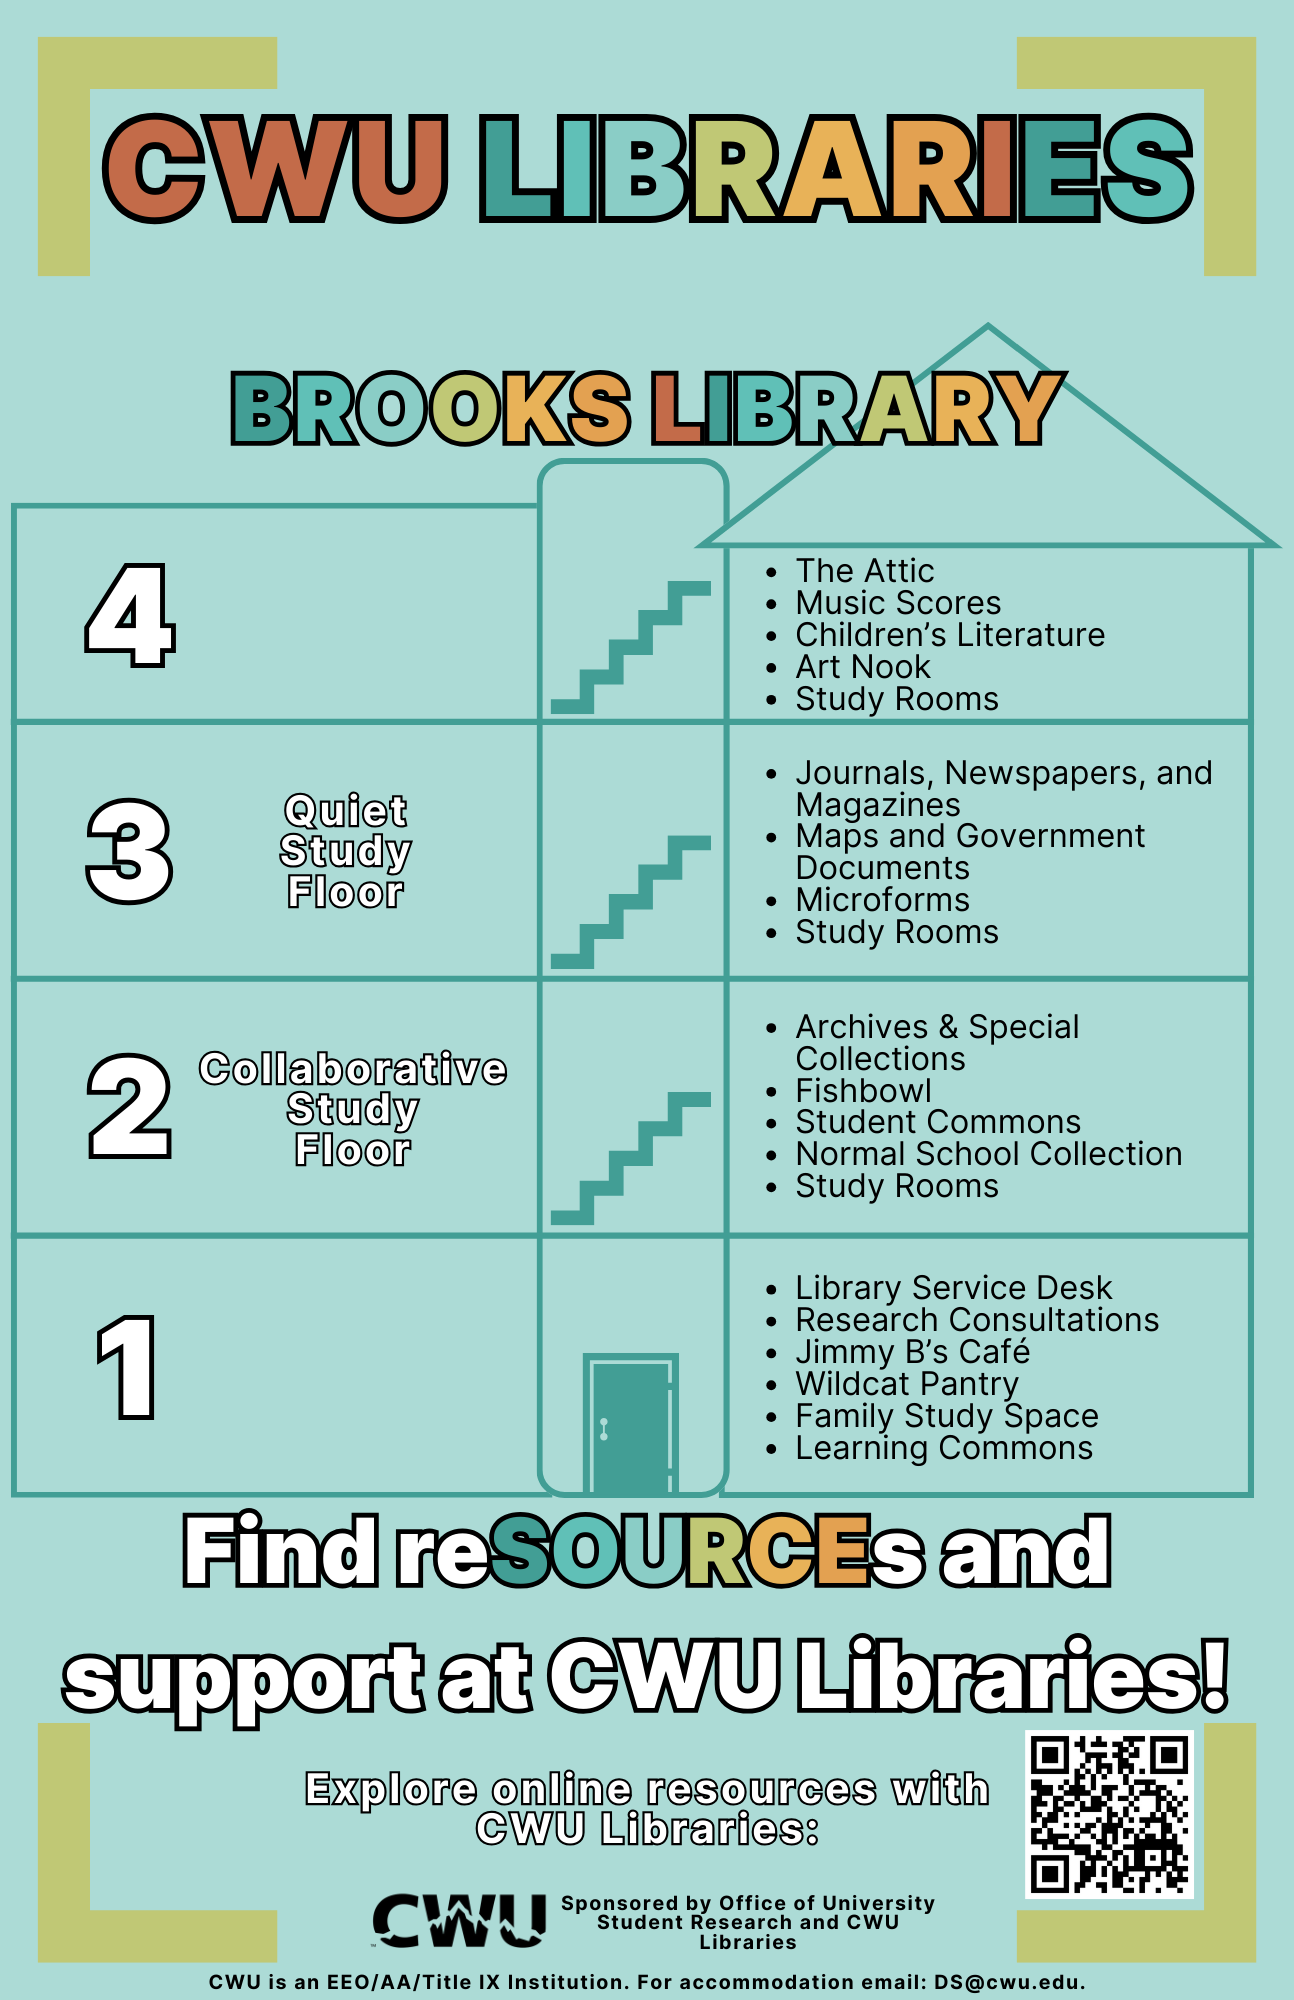 library-promotion-poster.png, Brooks Library CWU. First floor- library service desk, research consultations, jimmy b's cafe, wildcat pantry, family study space, learning commons. Second floor (collaborative study floor)- archives and special collections, fishbowl, students commons, normal school collections, study rooms. Third floor (quiet study floor) - journals, newspapers, and magazines, maps and government documents, microforms, study rooms. Fourth floor- the attic, music scores, children's literature, art nook, study rooms.  